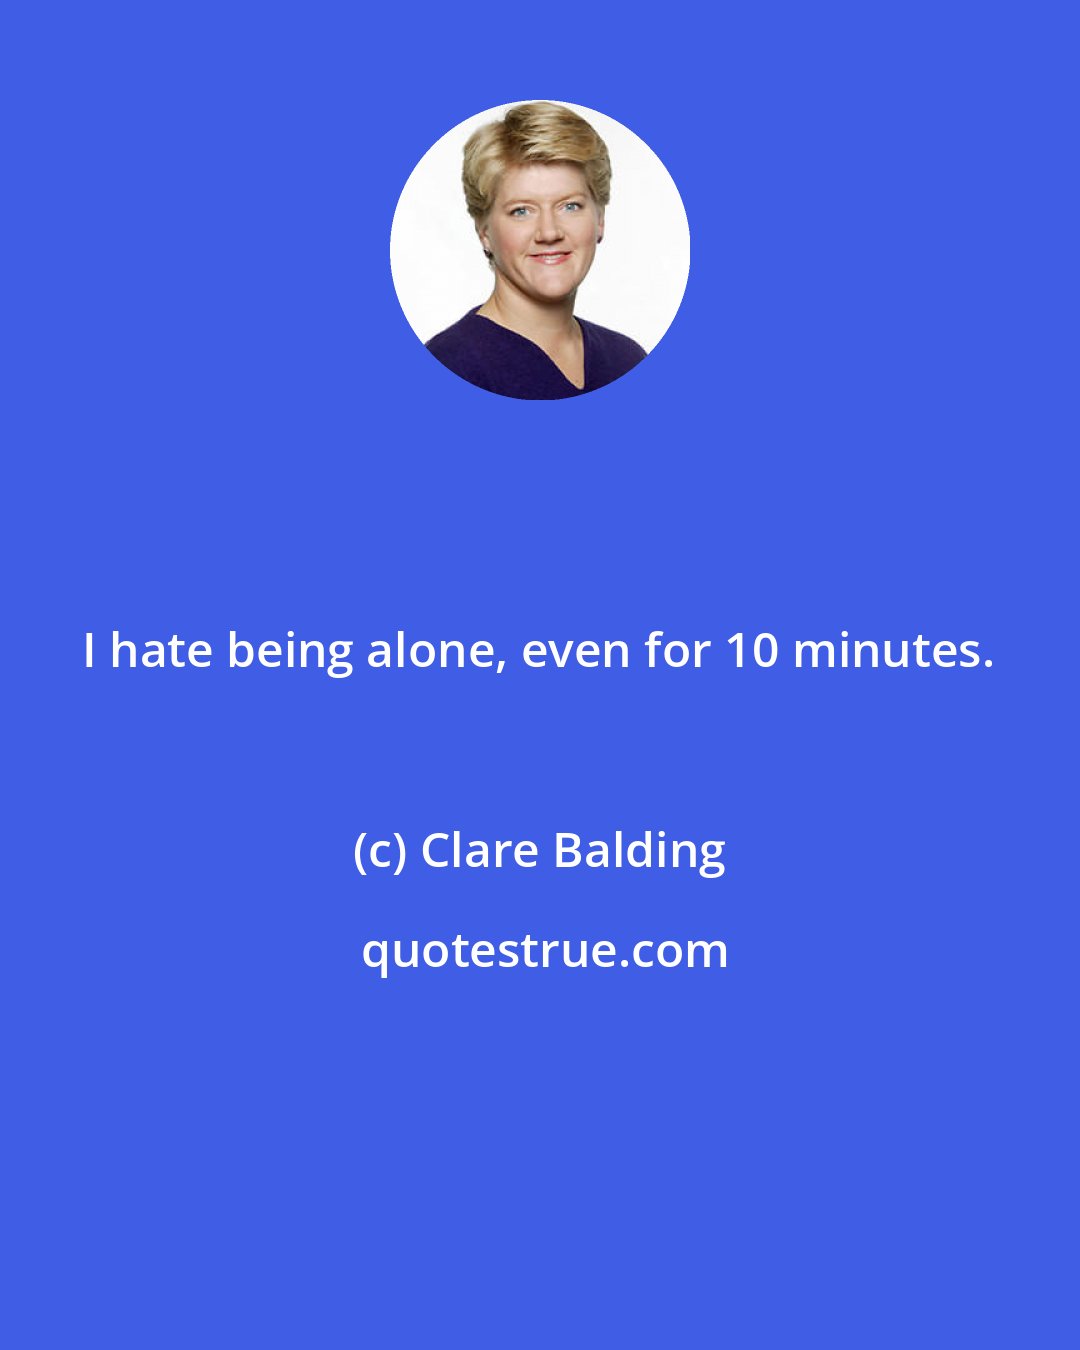 Clare Balding: I hate being alone, even for 10 minutes.